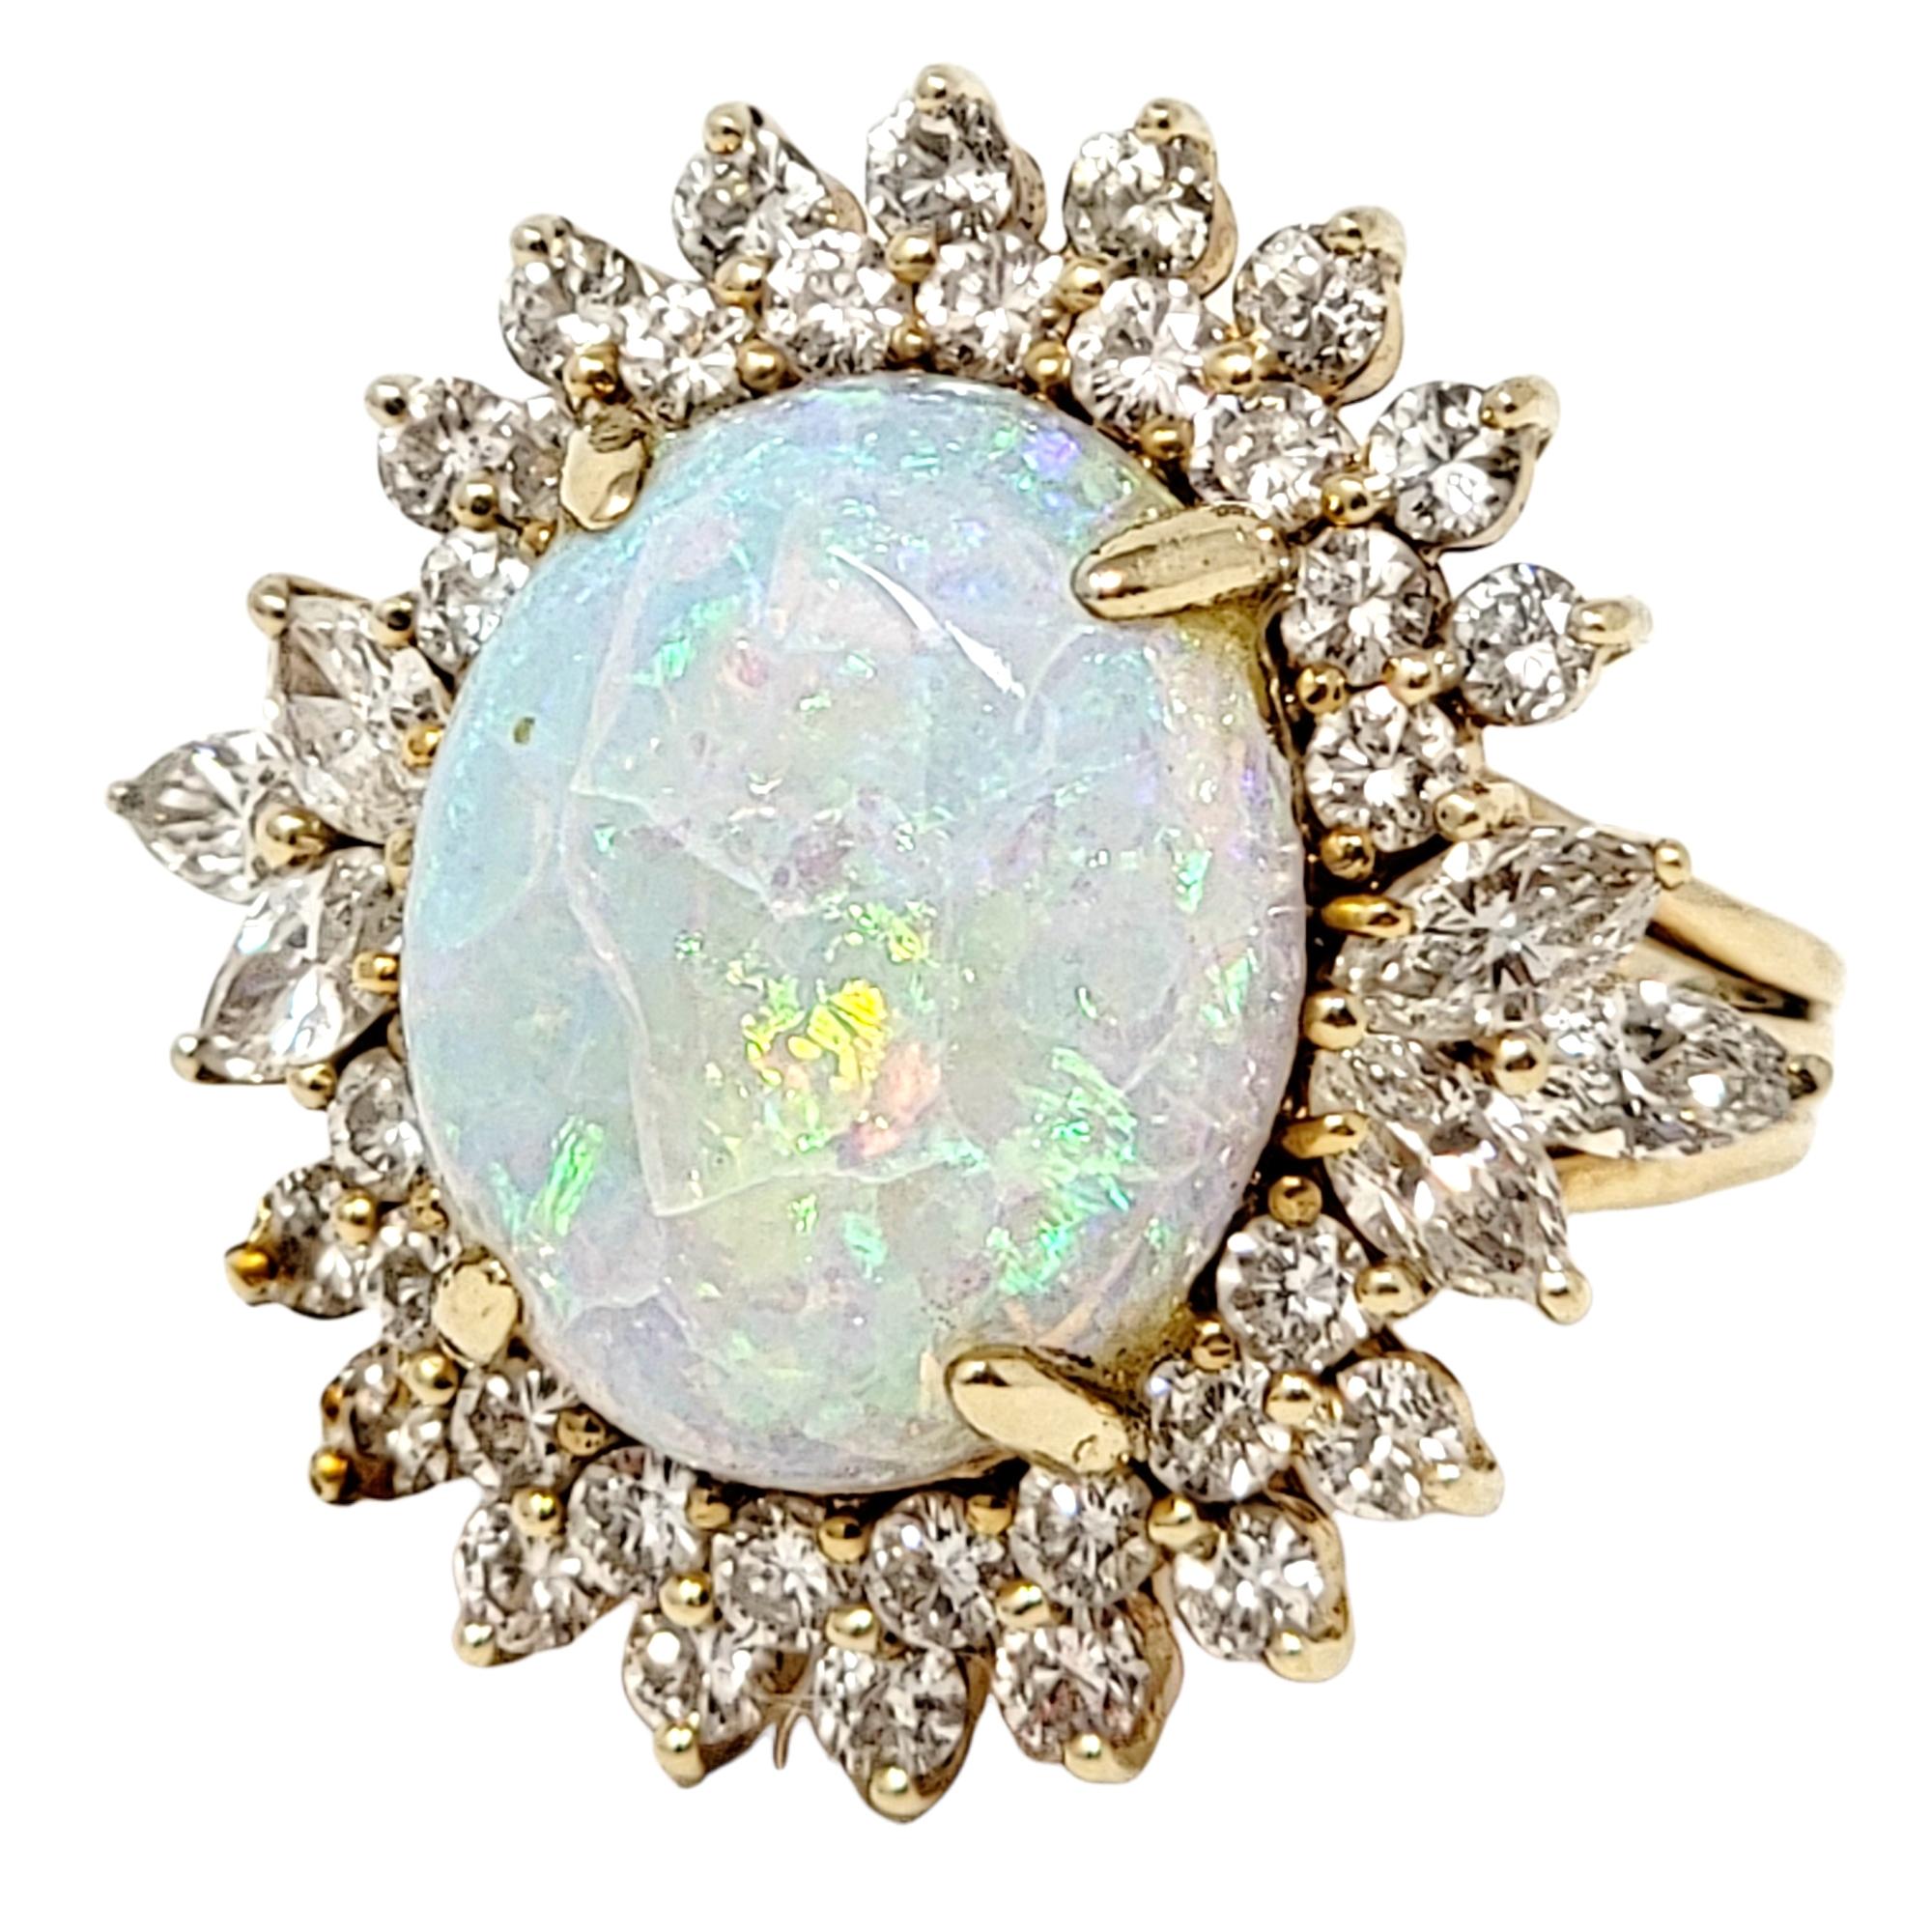 Ring size: 5.75

Spectacular, eye-catching opal and diamond halo cocktail ring will light up your finger! The stunning main stone has a gorgeous play-of-color, showing iridescent shades of purple and green within the white opal, while the icy